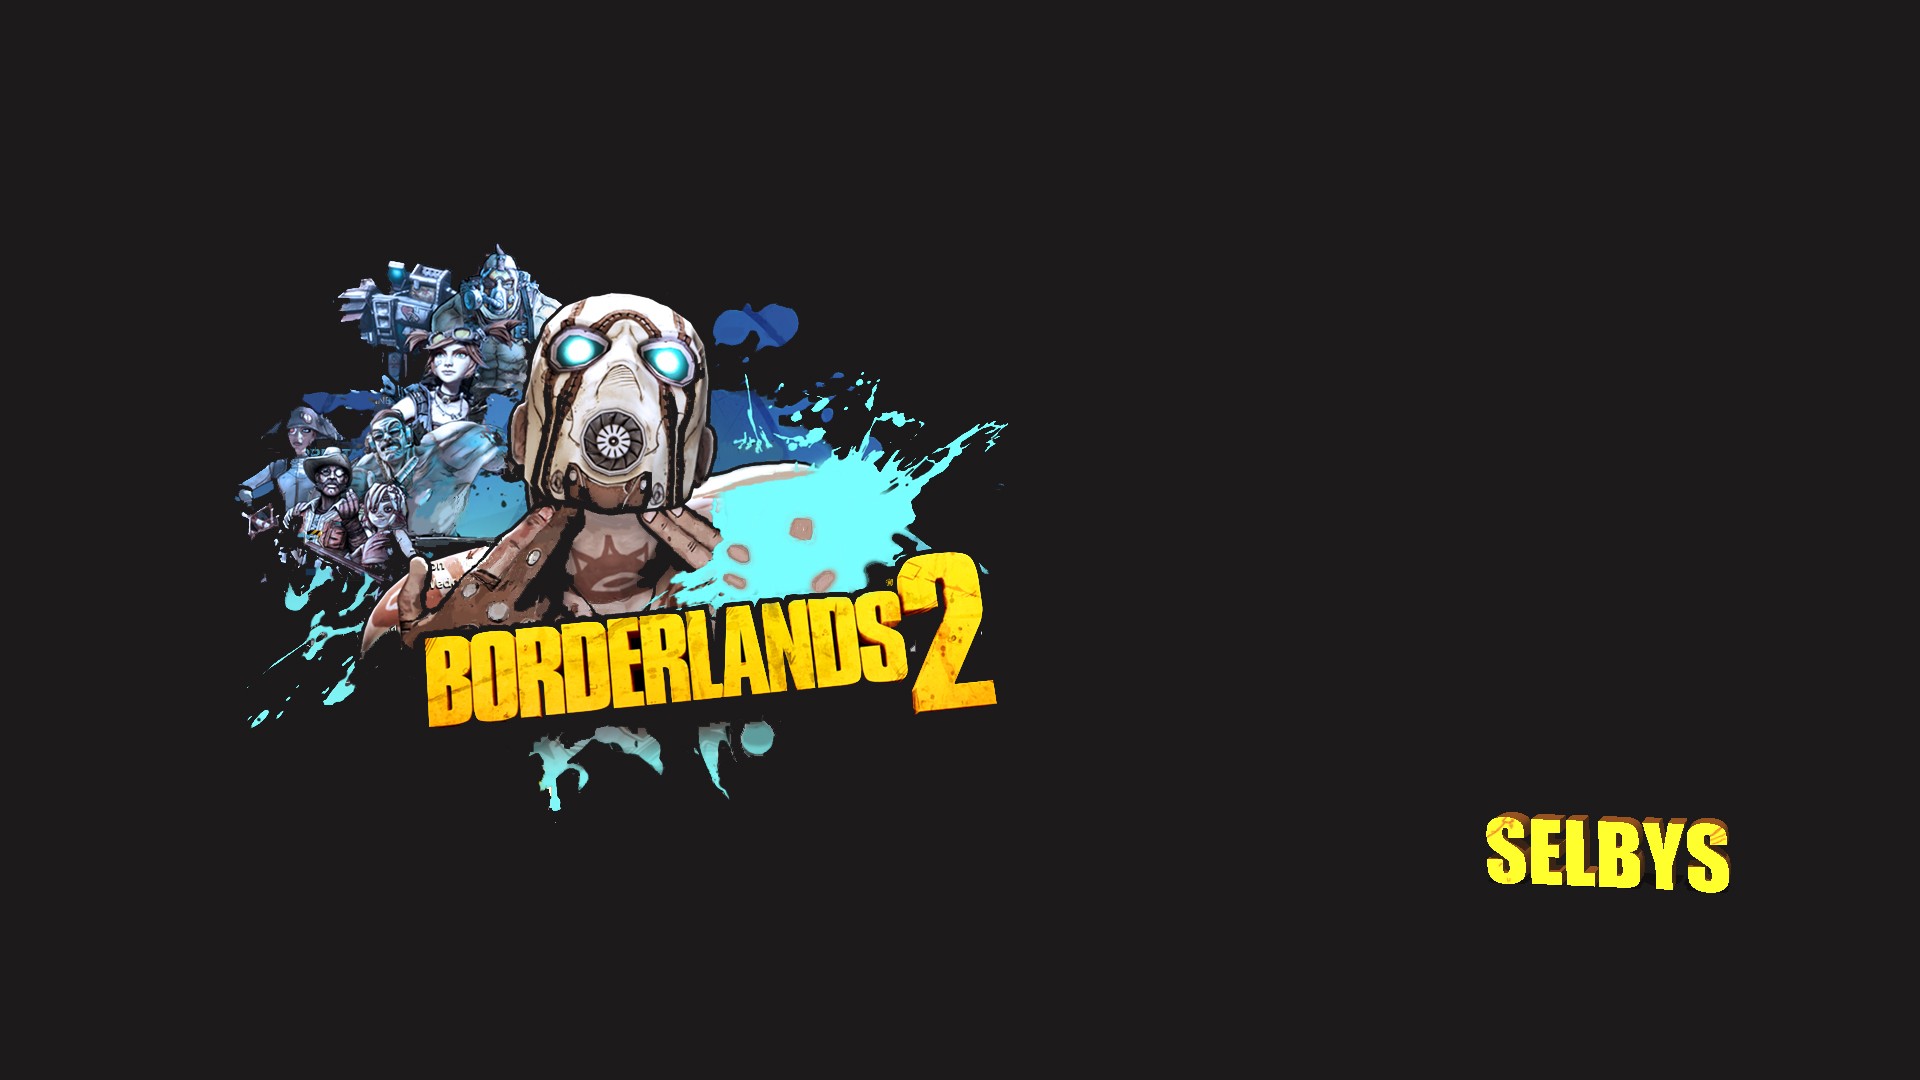 General 1920x1080 Borderlands 2 video games video game art simple background PC gaming black background